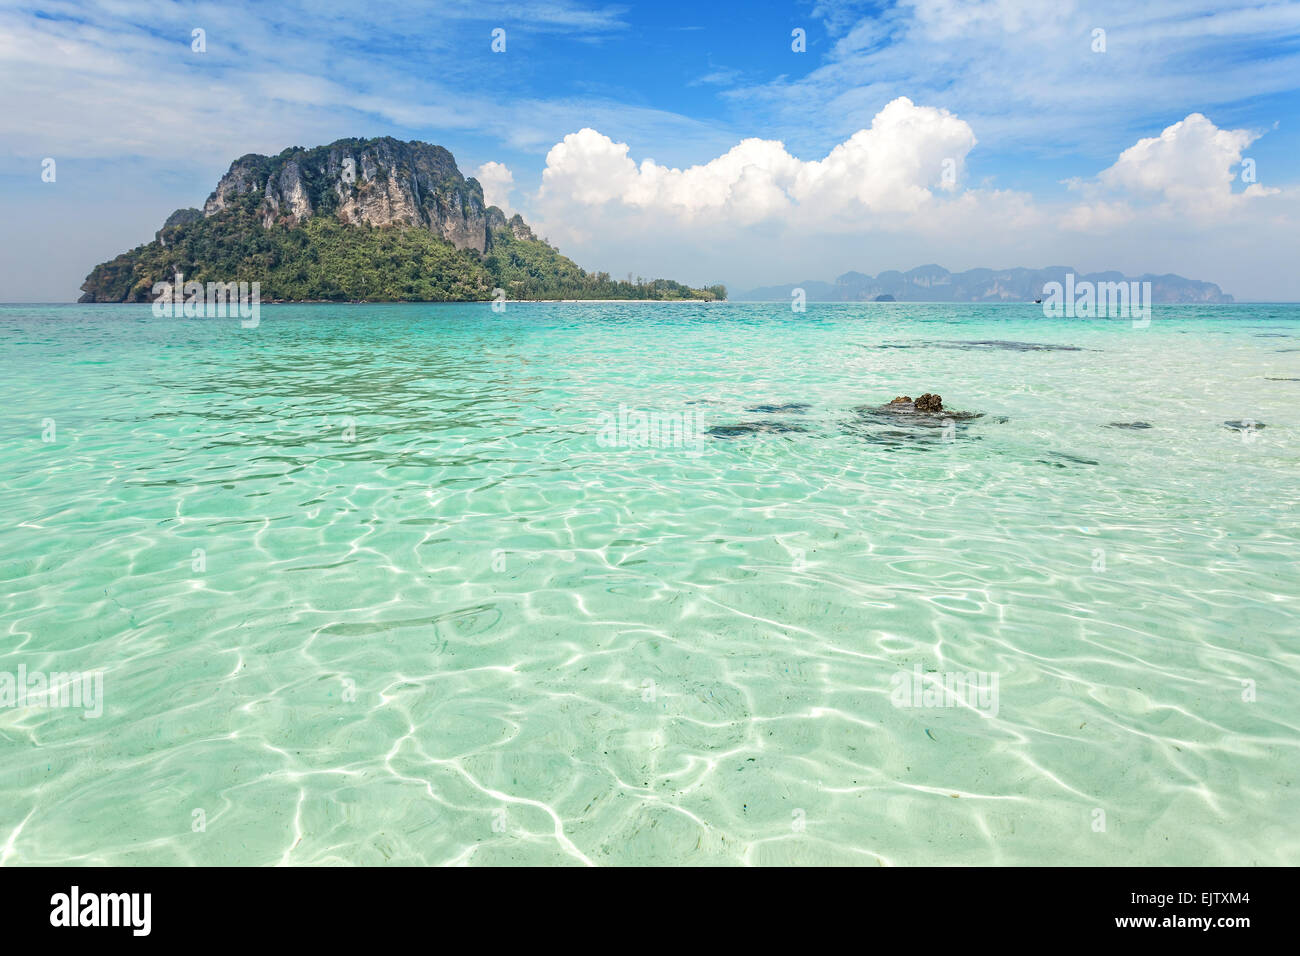 Tropical island located in Krabi province, Thailand. Stock Photo